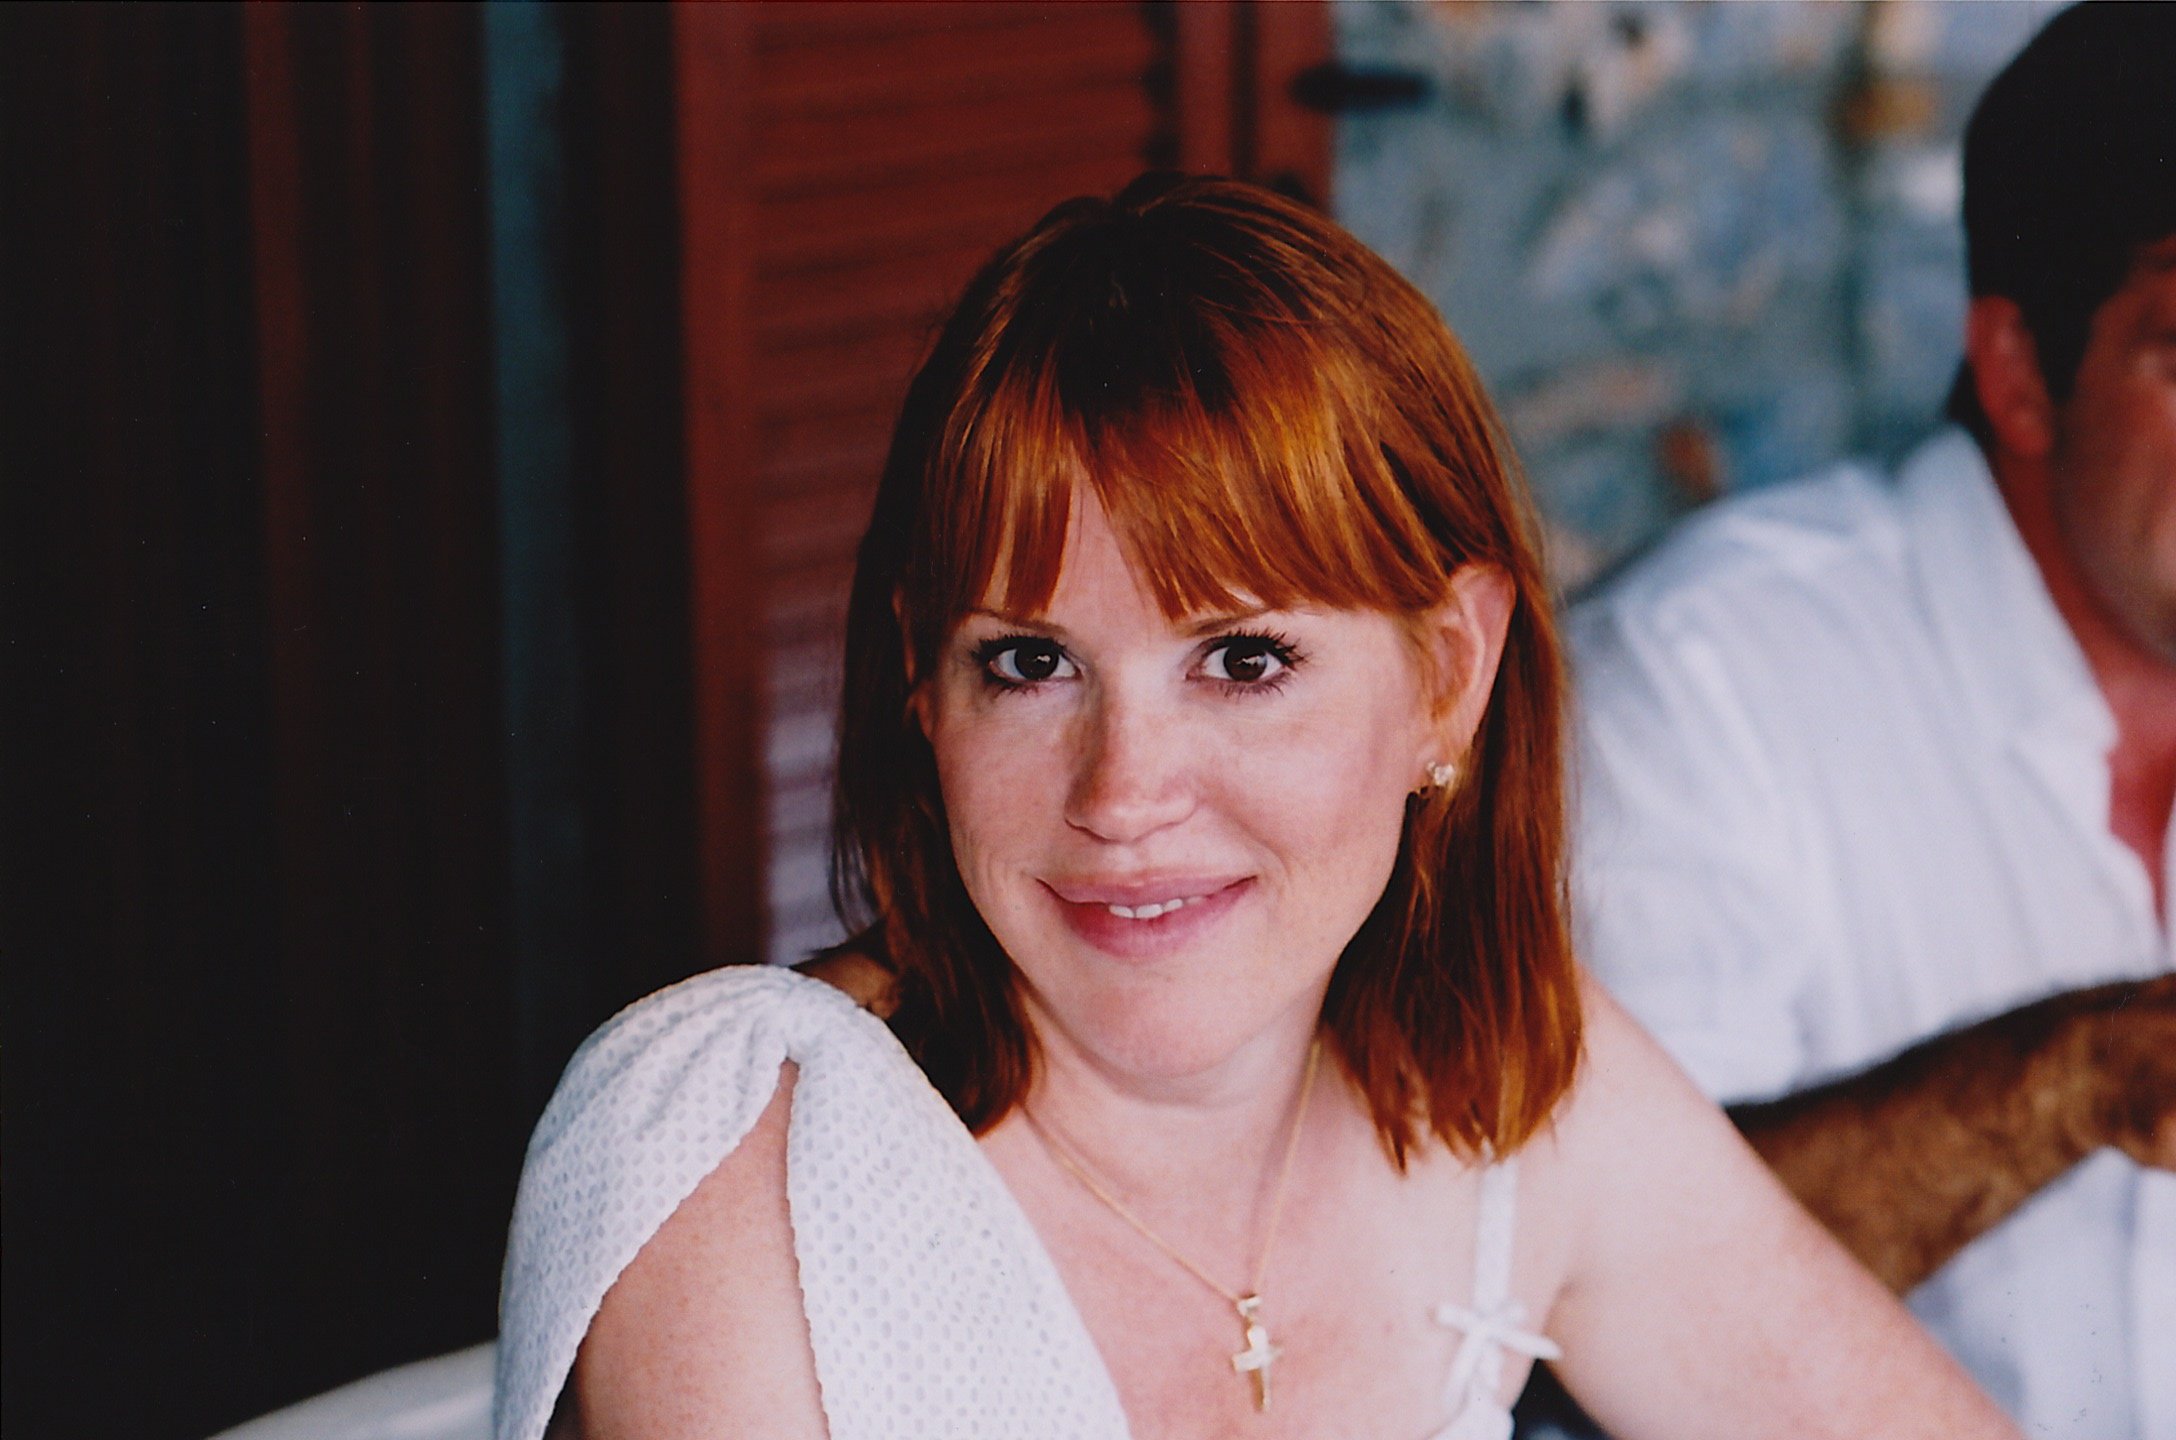 Molly Ringwald in Greece on August 21, 2010 | Photo: Wikimedia/Panio Gianopoulos